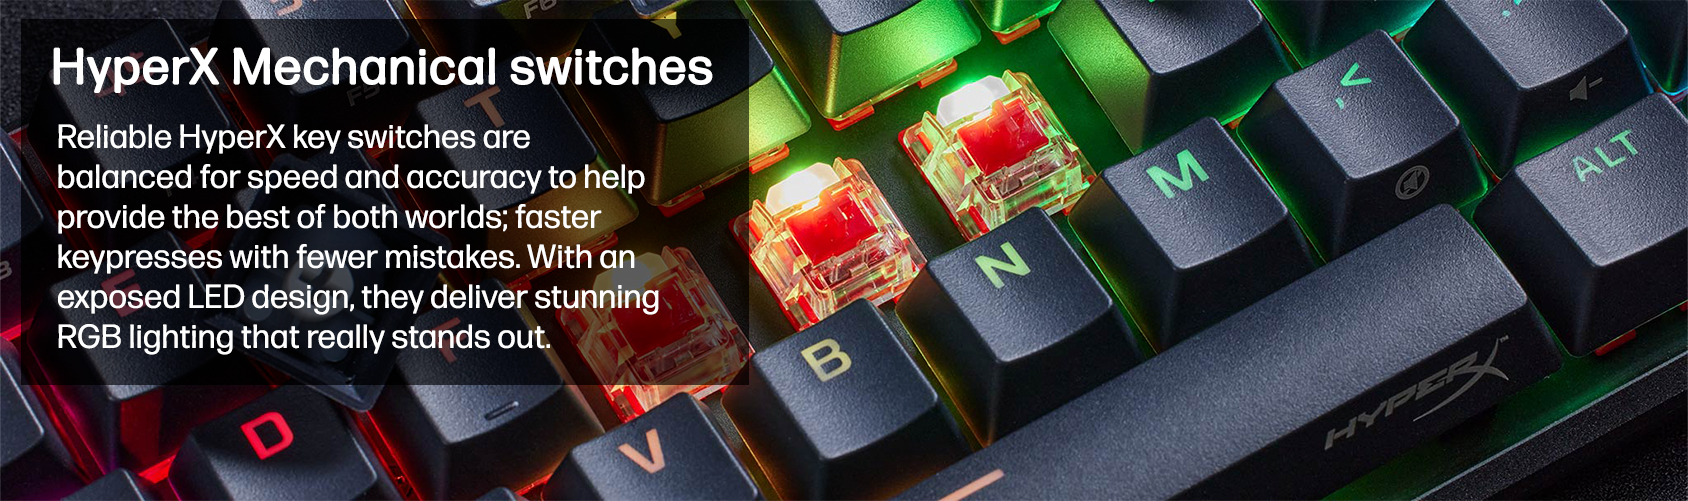 HyperX Mechanical switches